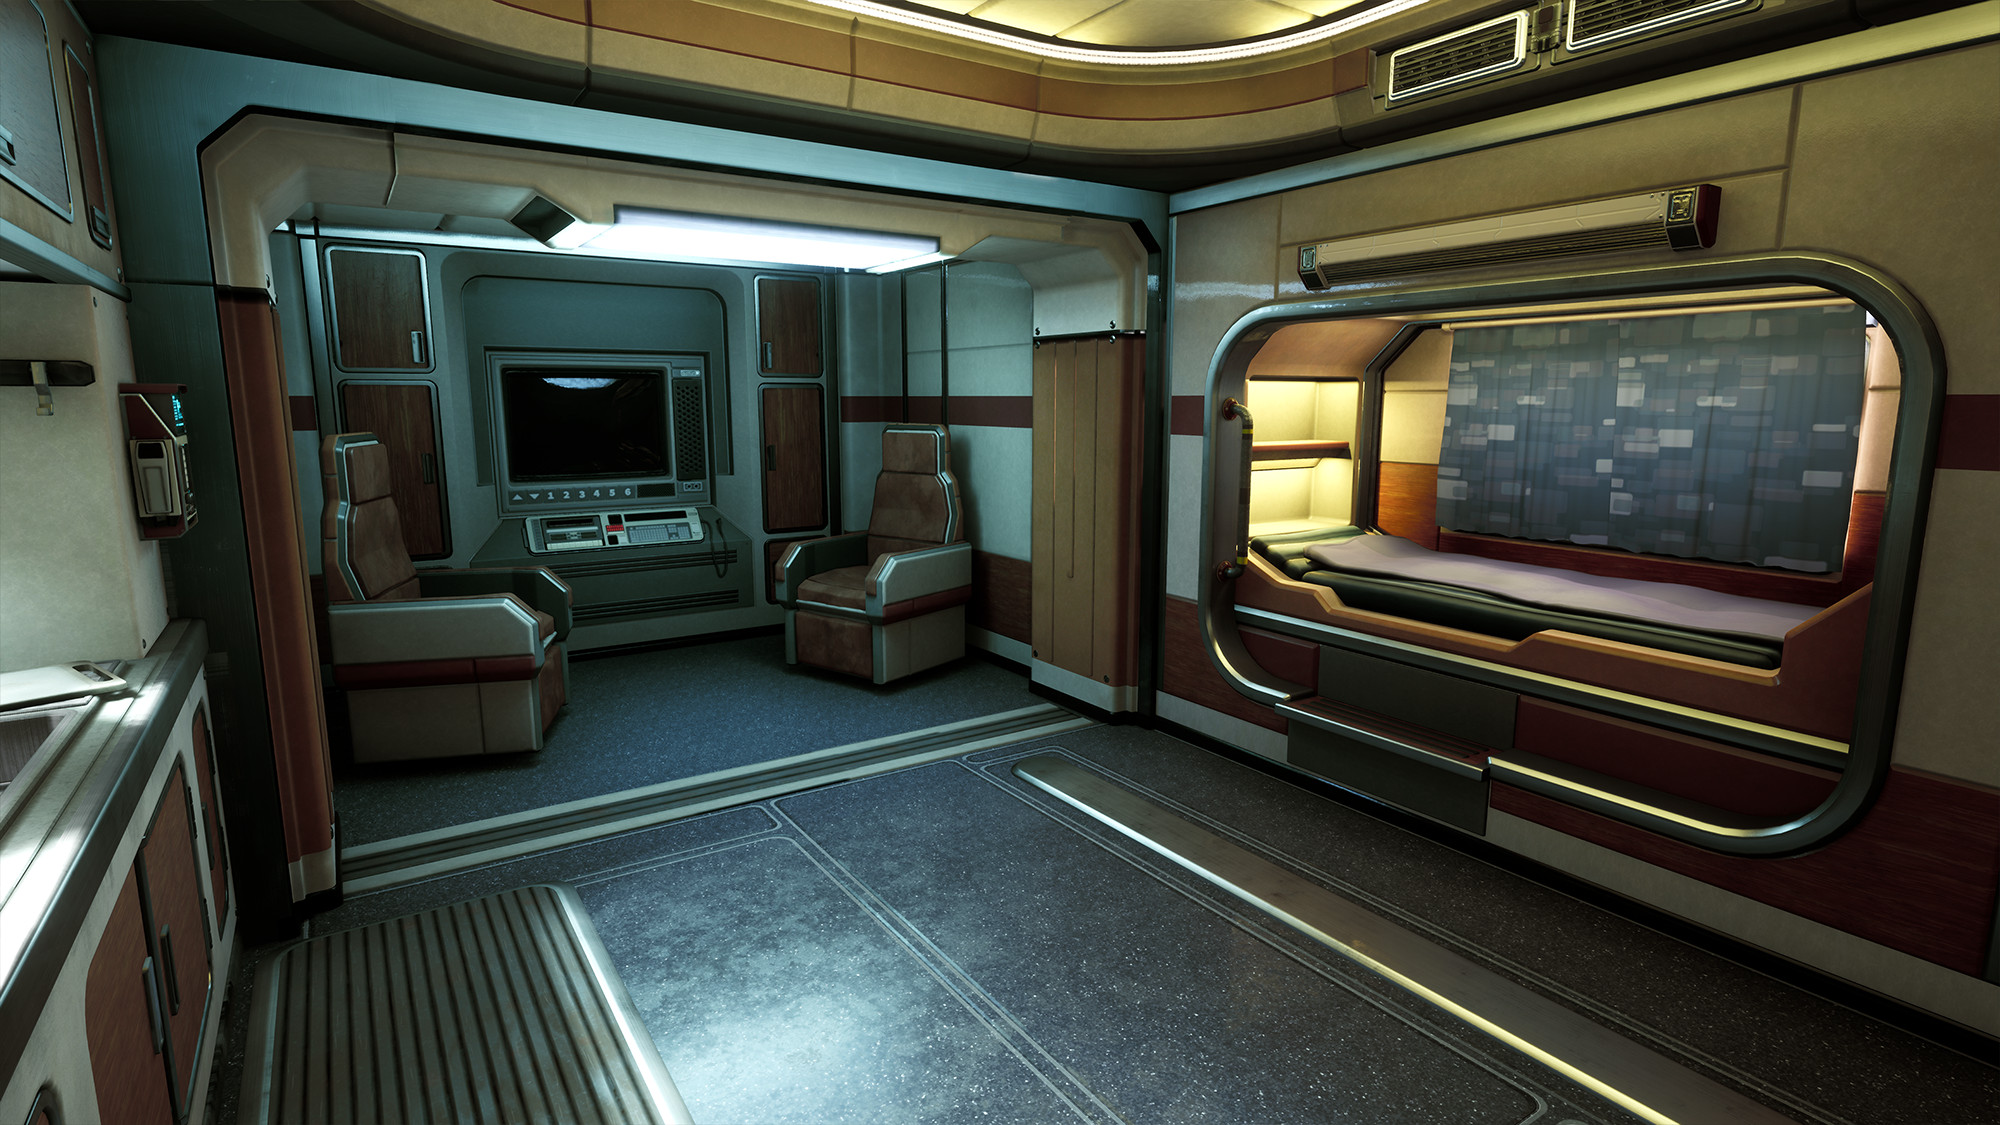 A shot of the living quarters, this view comprises the other half of the cabin's space.